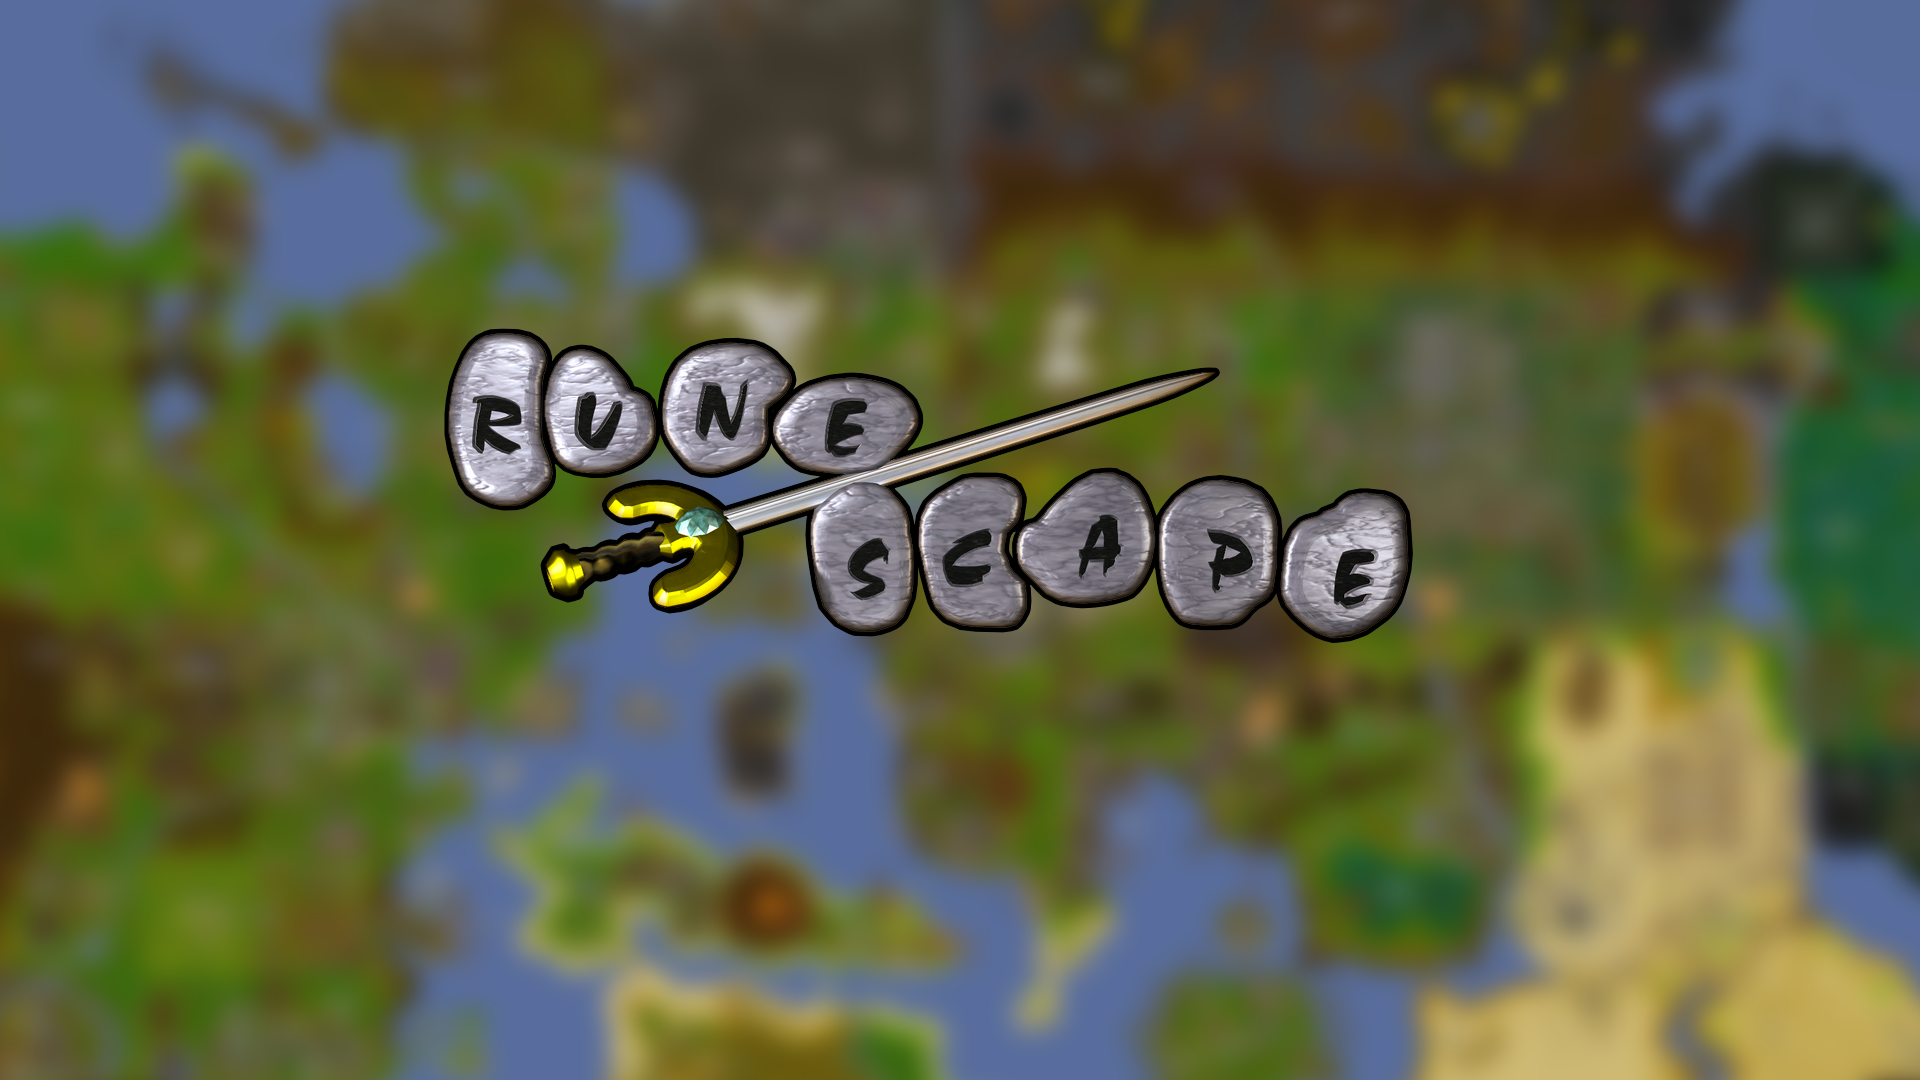 I Made A Very Nice Osrs Wallpaper If Anyone Is Interested 2007scape